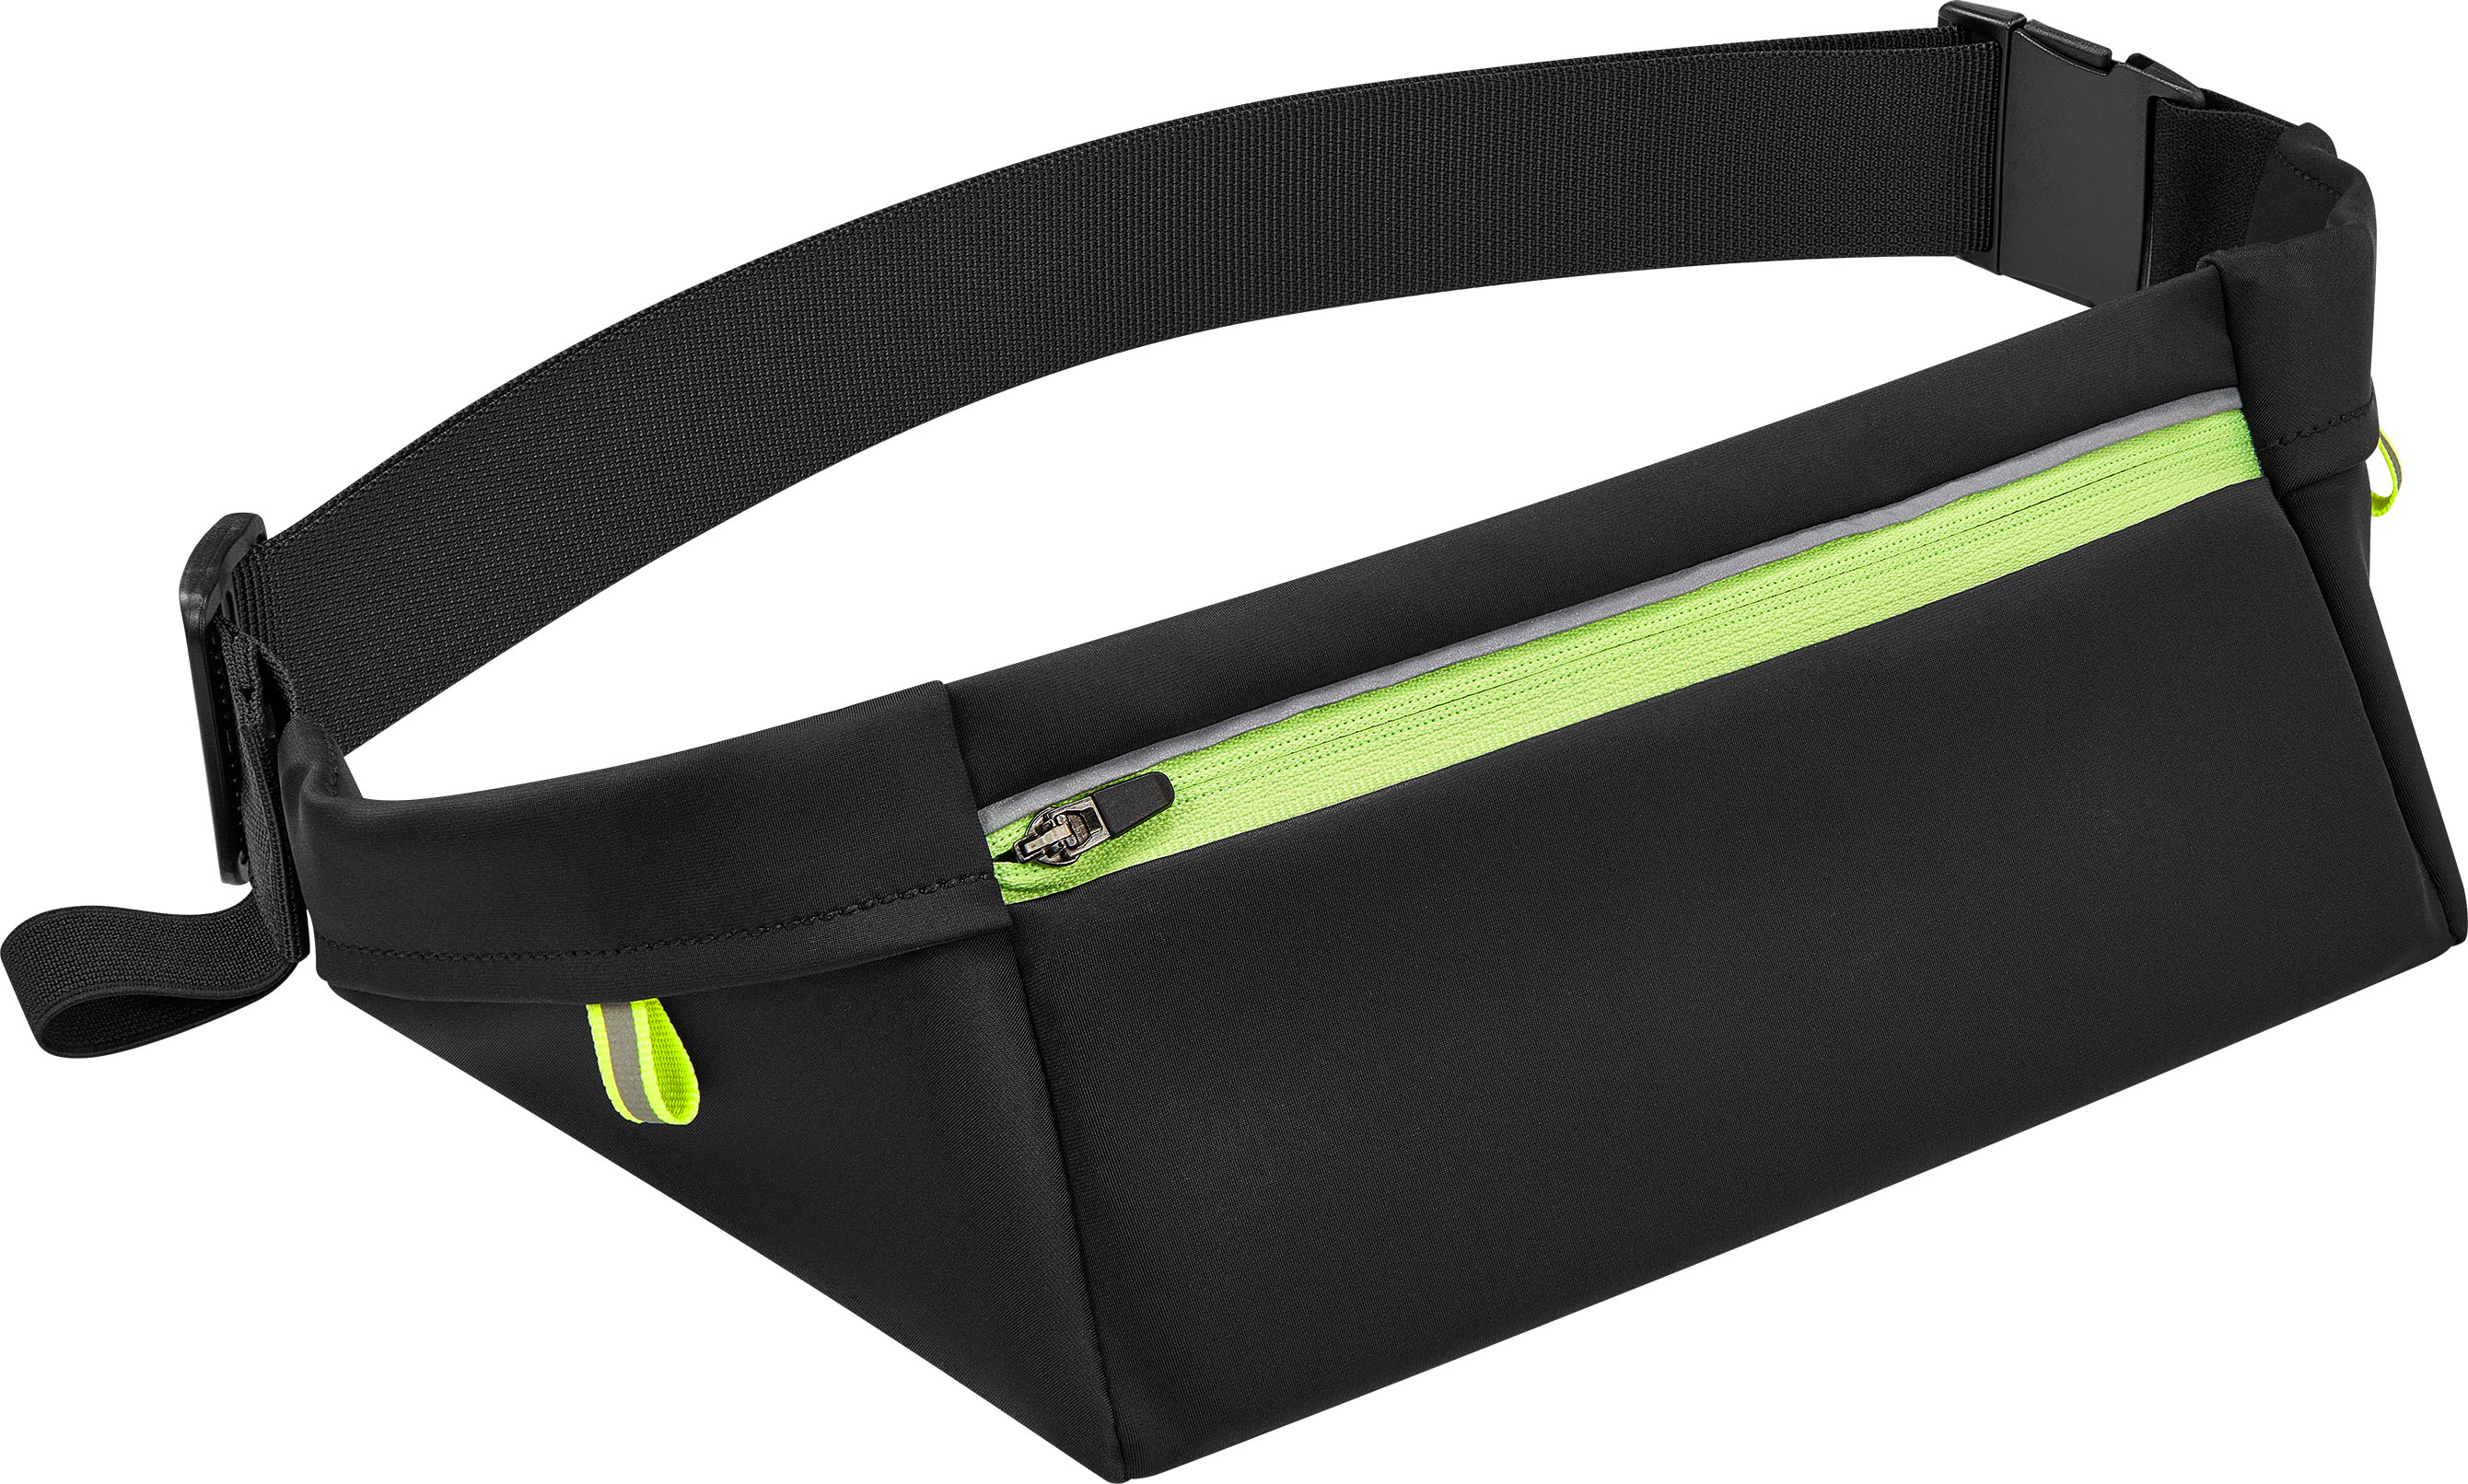 Insignia™ Running Belt for Phone Screens up to 7